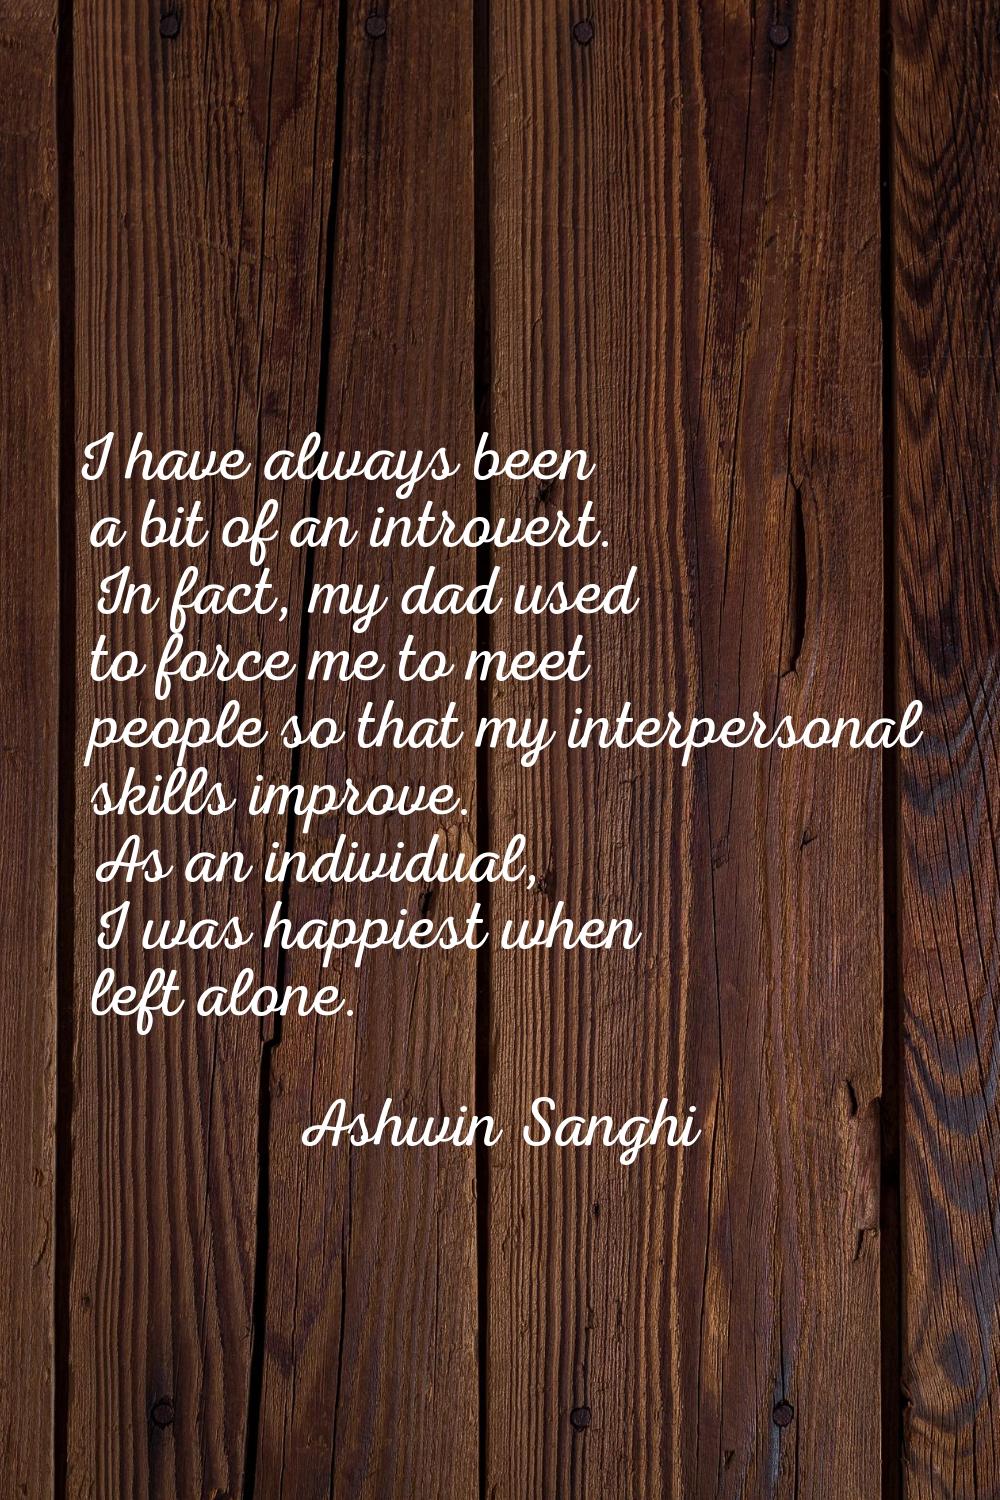 I have always been a bit of an introvert. In fact, my dad used to force me to meet people so that m